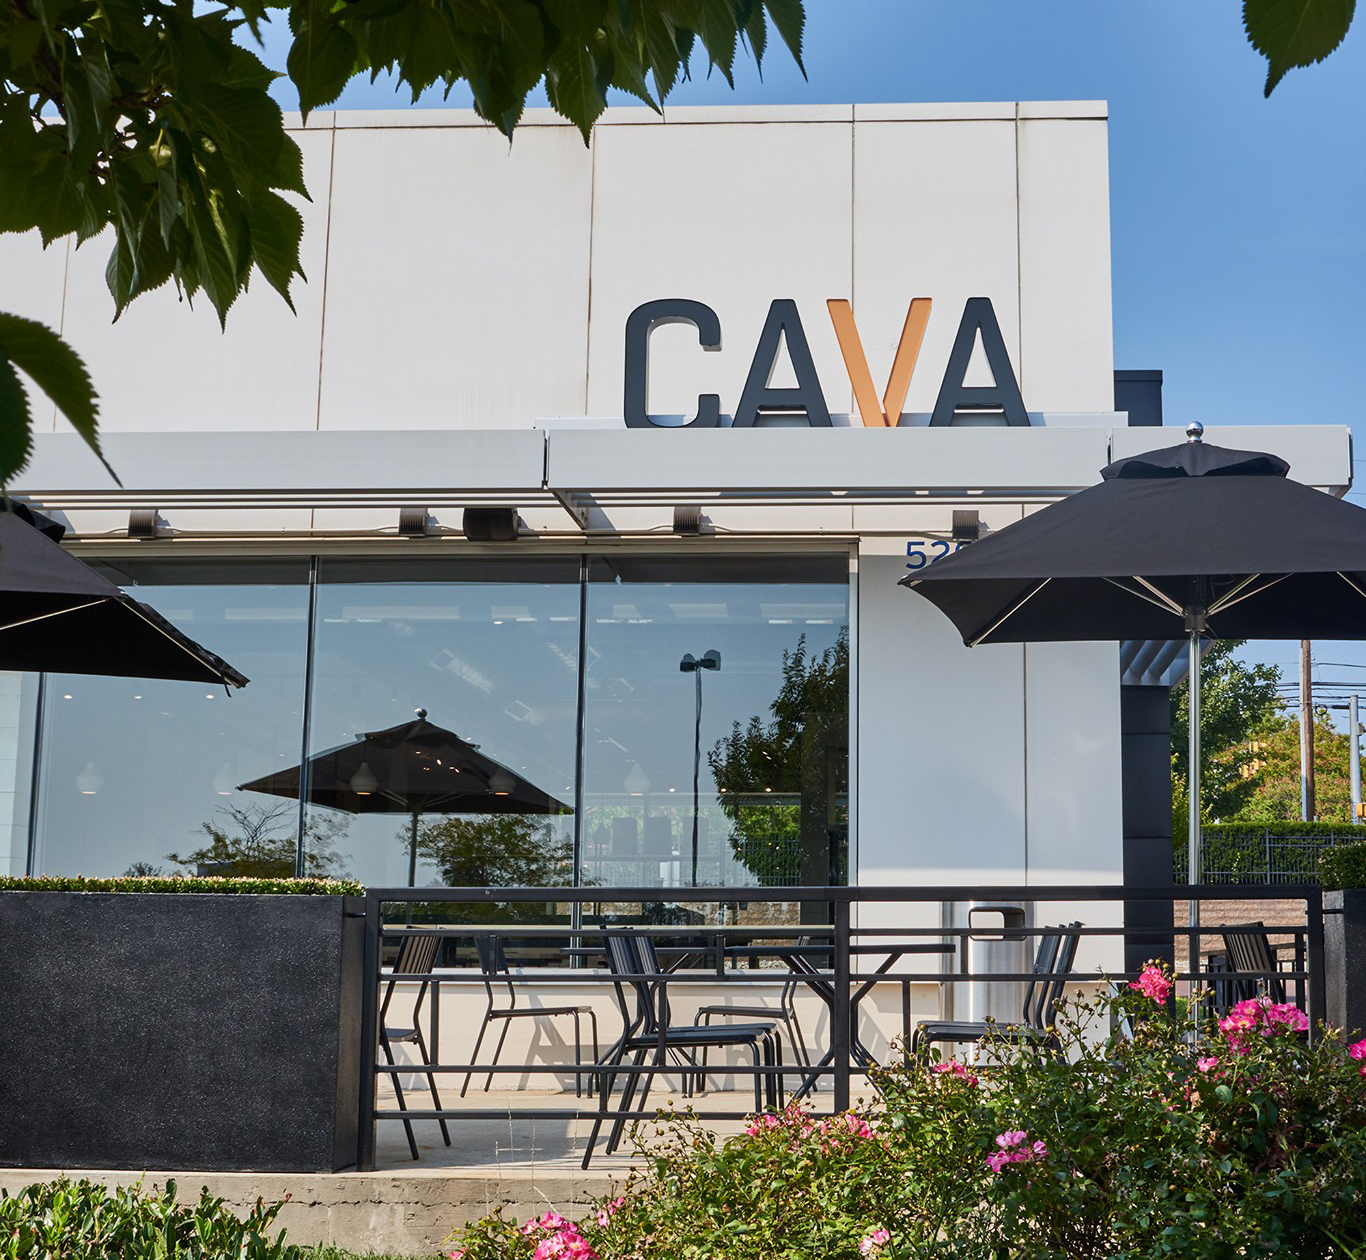 CAVA Grill bought Plano, Texas-based Zoës in late 2018 and has been converting the locations.